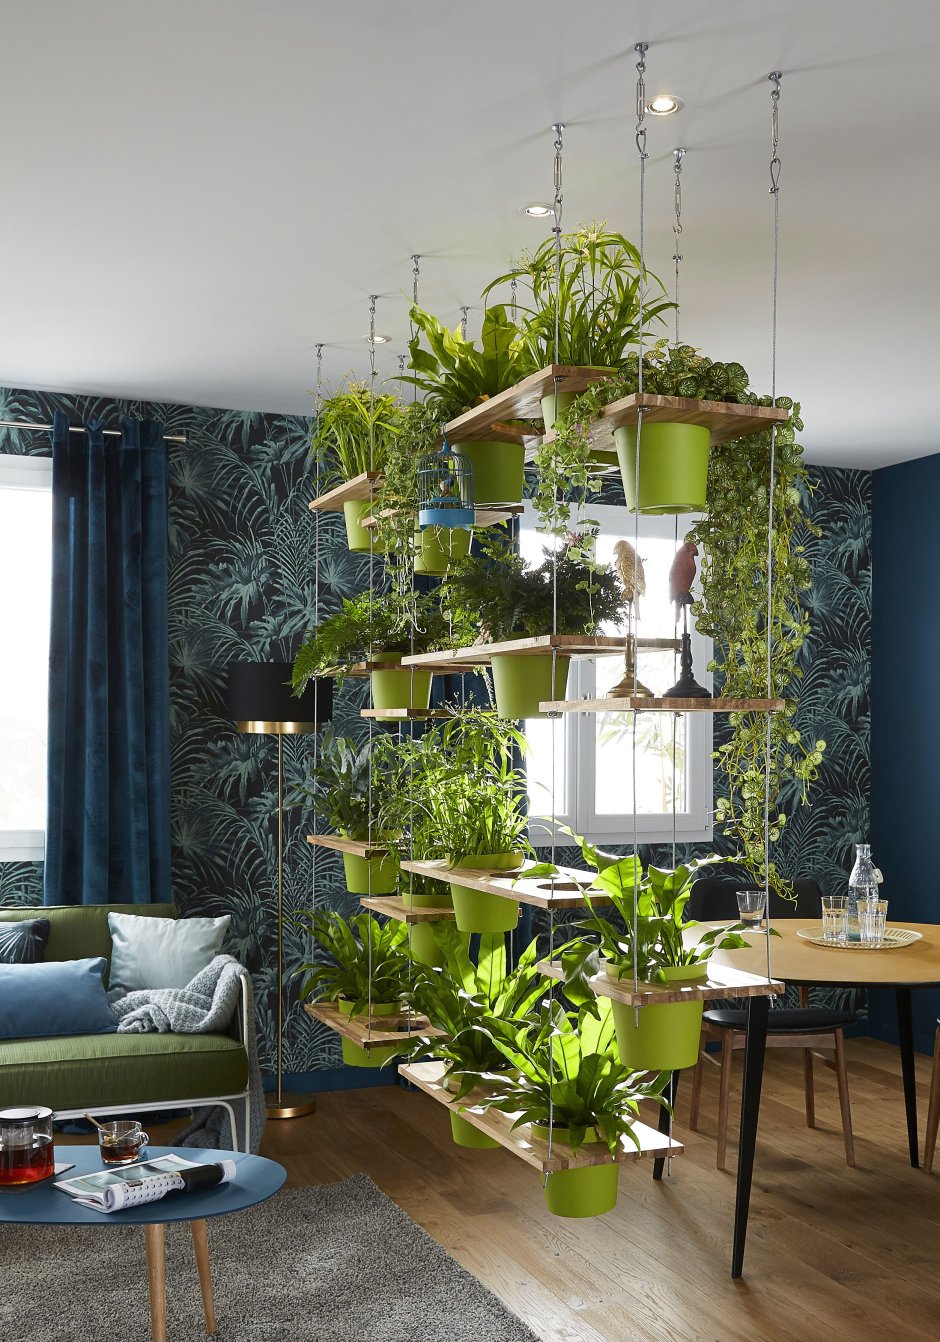 Decor walls with plants